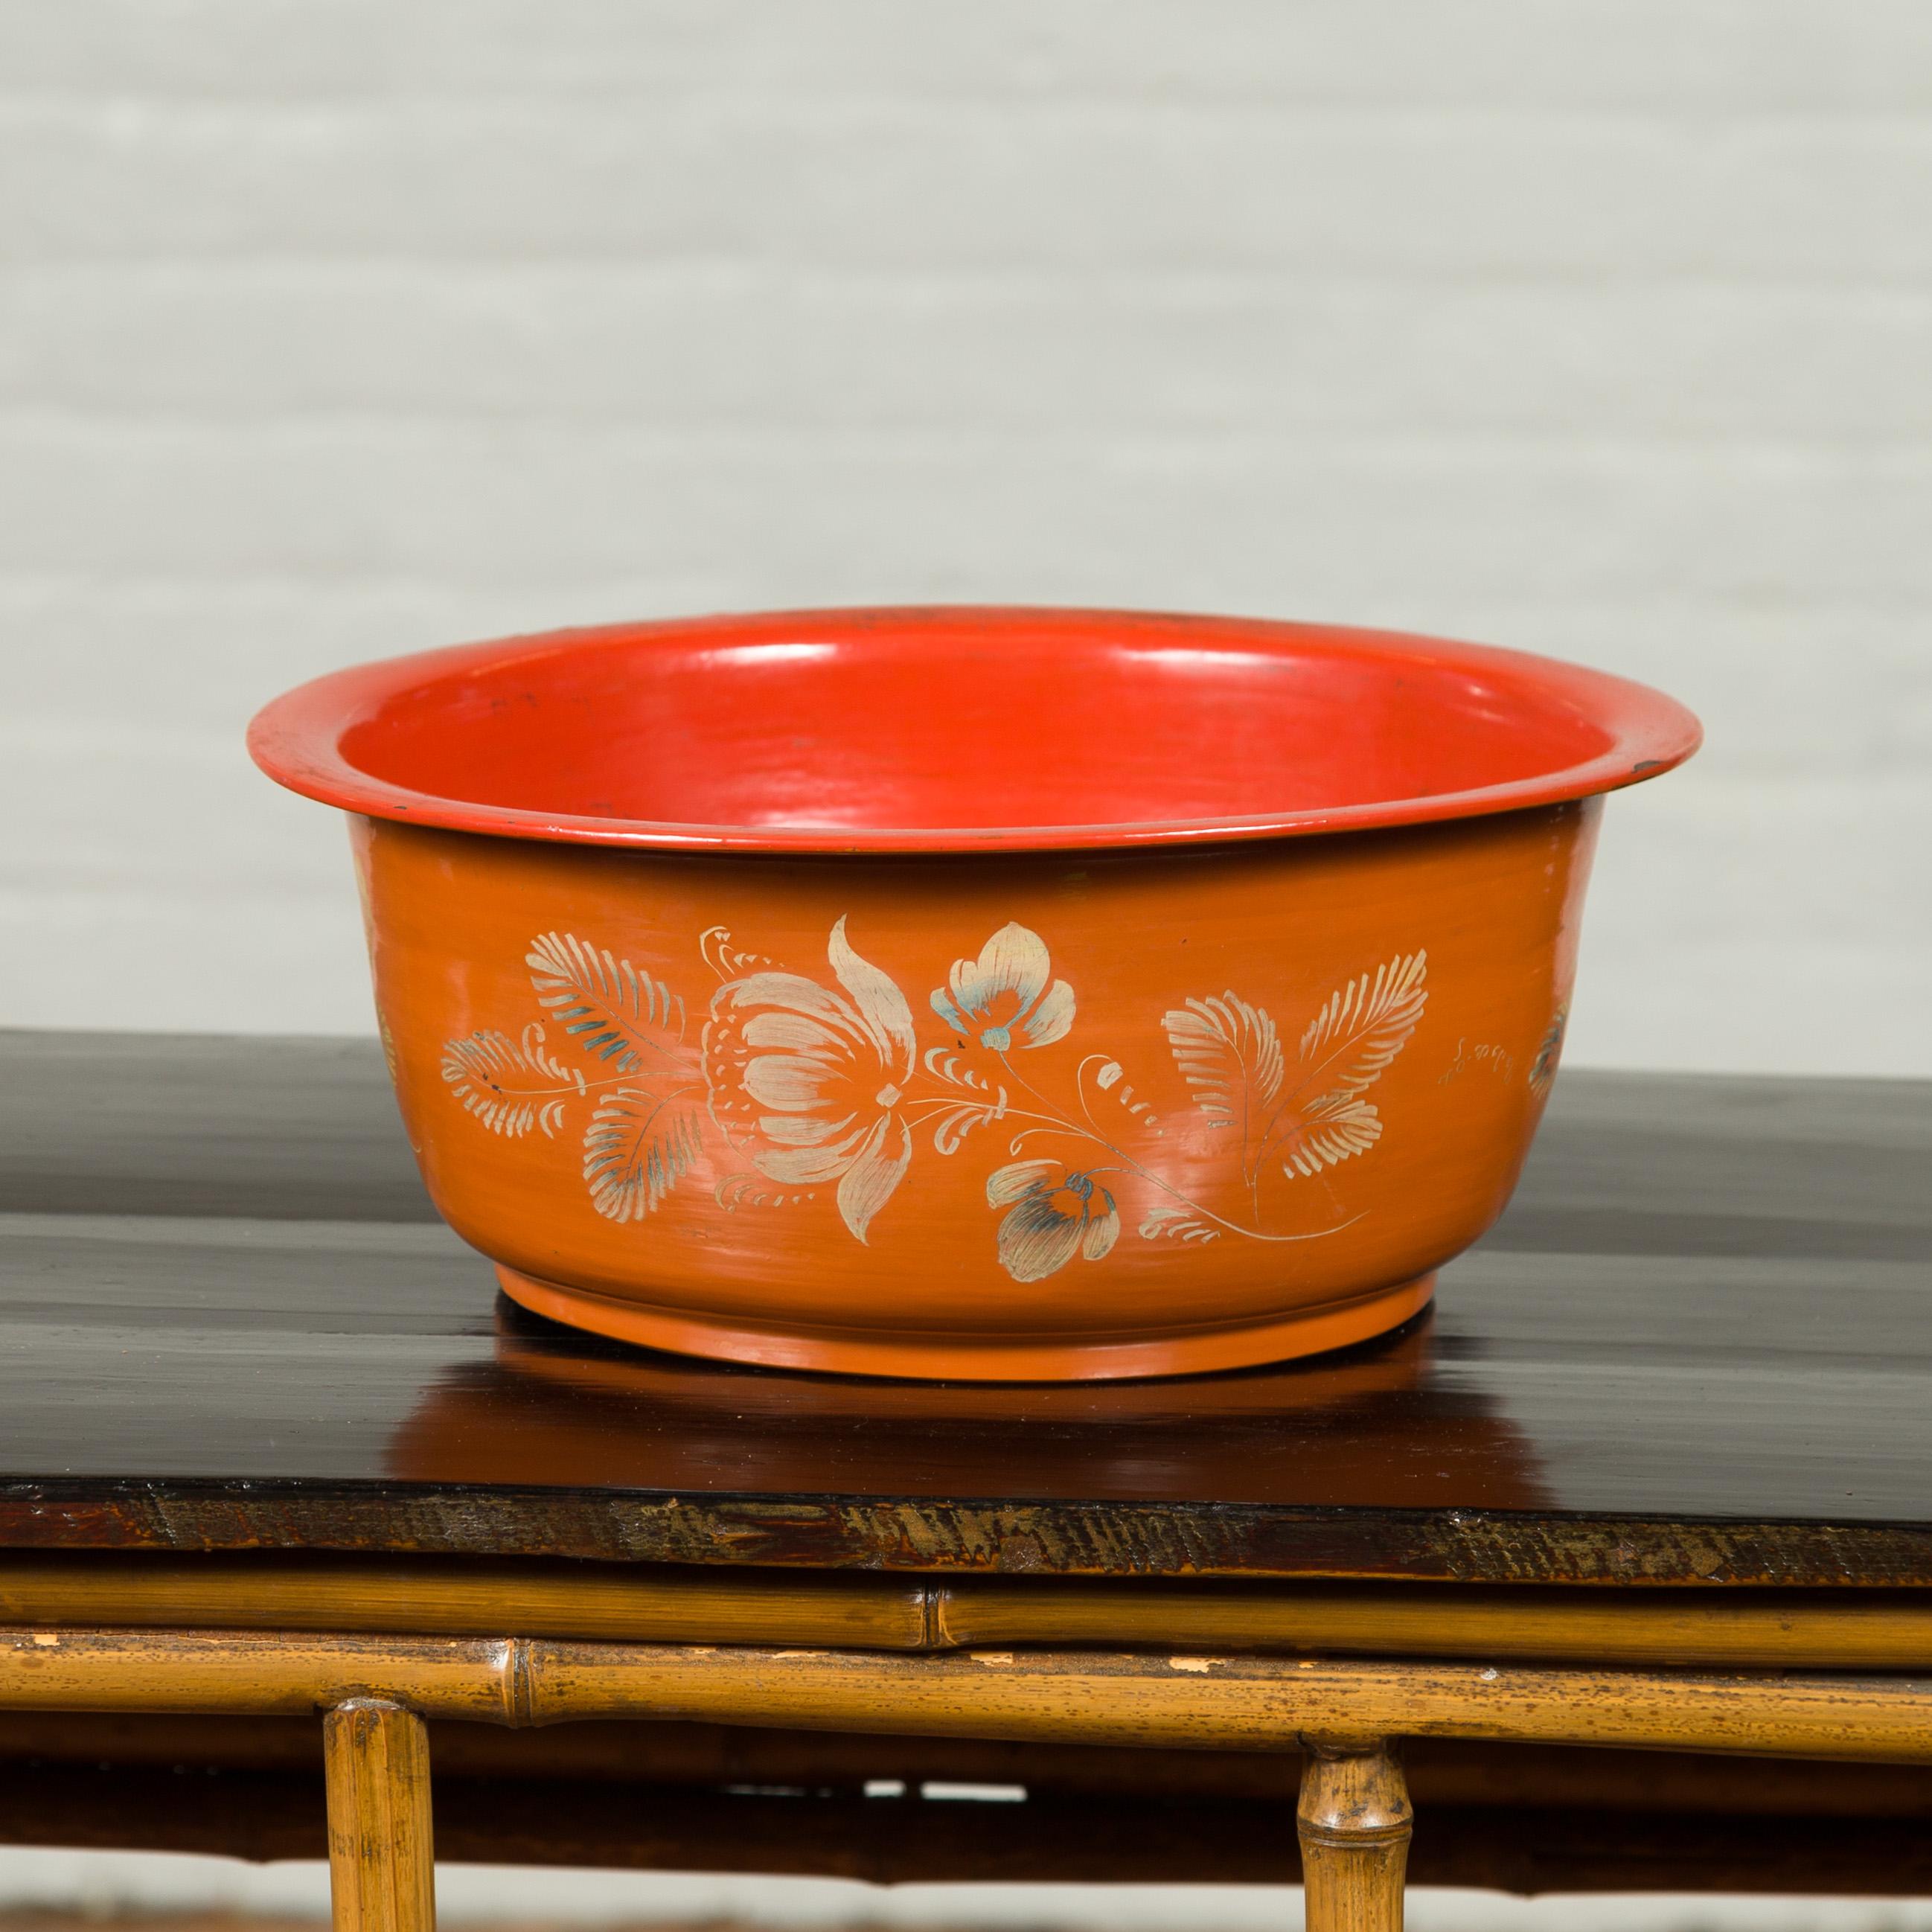 A Burmese vintage lacquered papier mâché bowl from the mid-20th century with floral design. Created in Burma during the midcentury period, this simple papier mâché bowl attracts our attention with its orange and red tones, delicately accented with